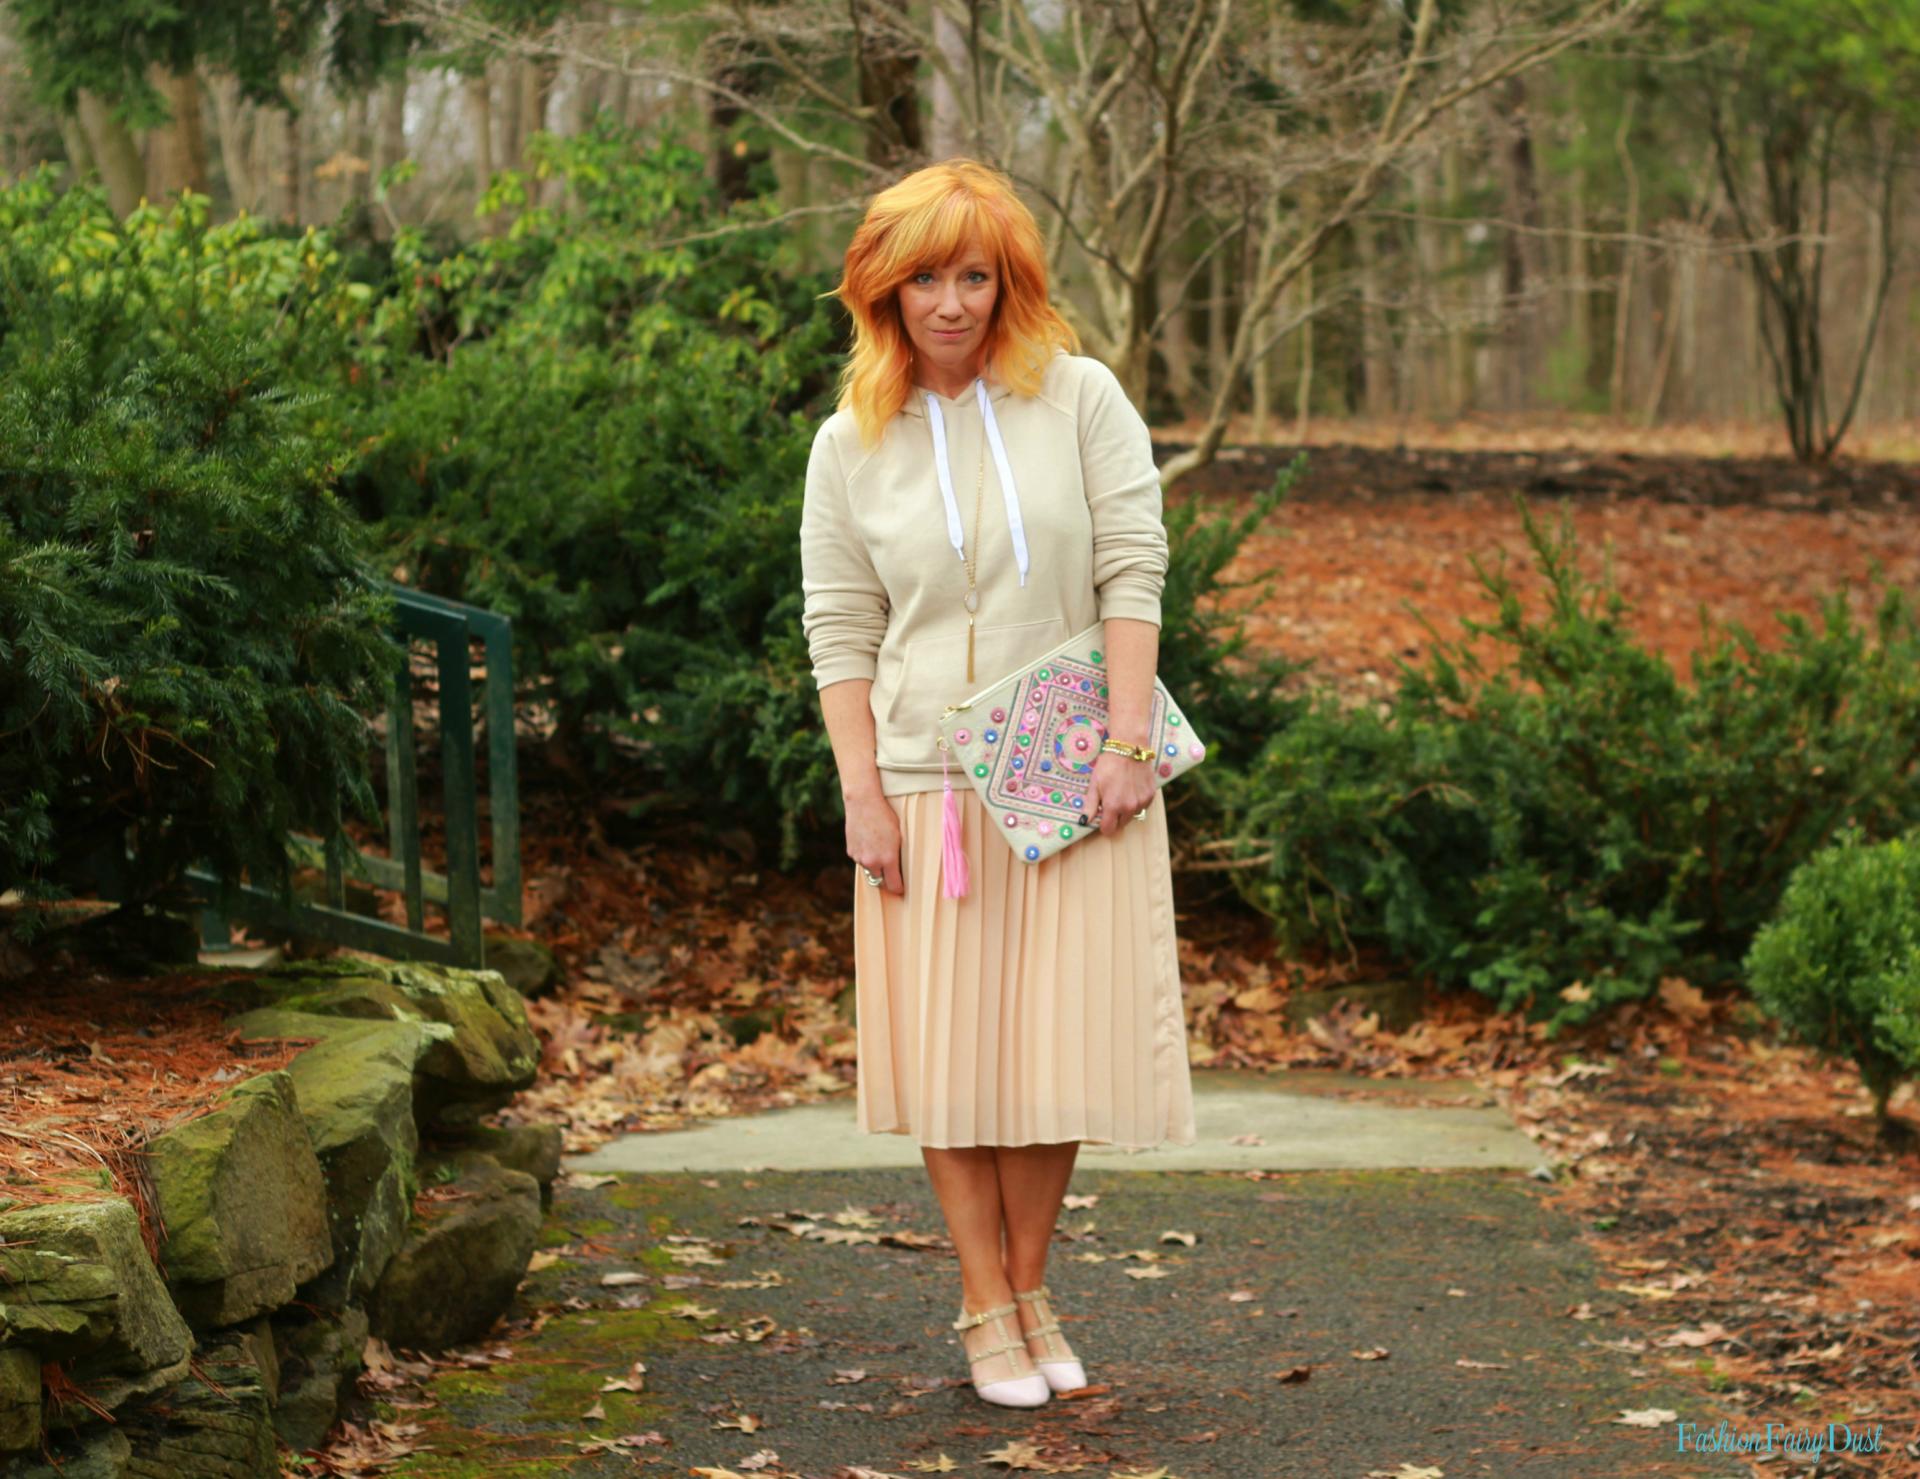 Embroidered clutch, blush pleated skirt and hoodie. How to pair casual with dressy pieces.